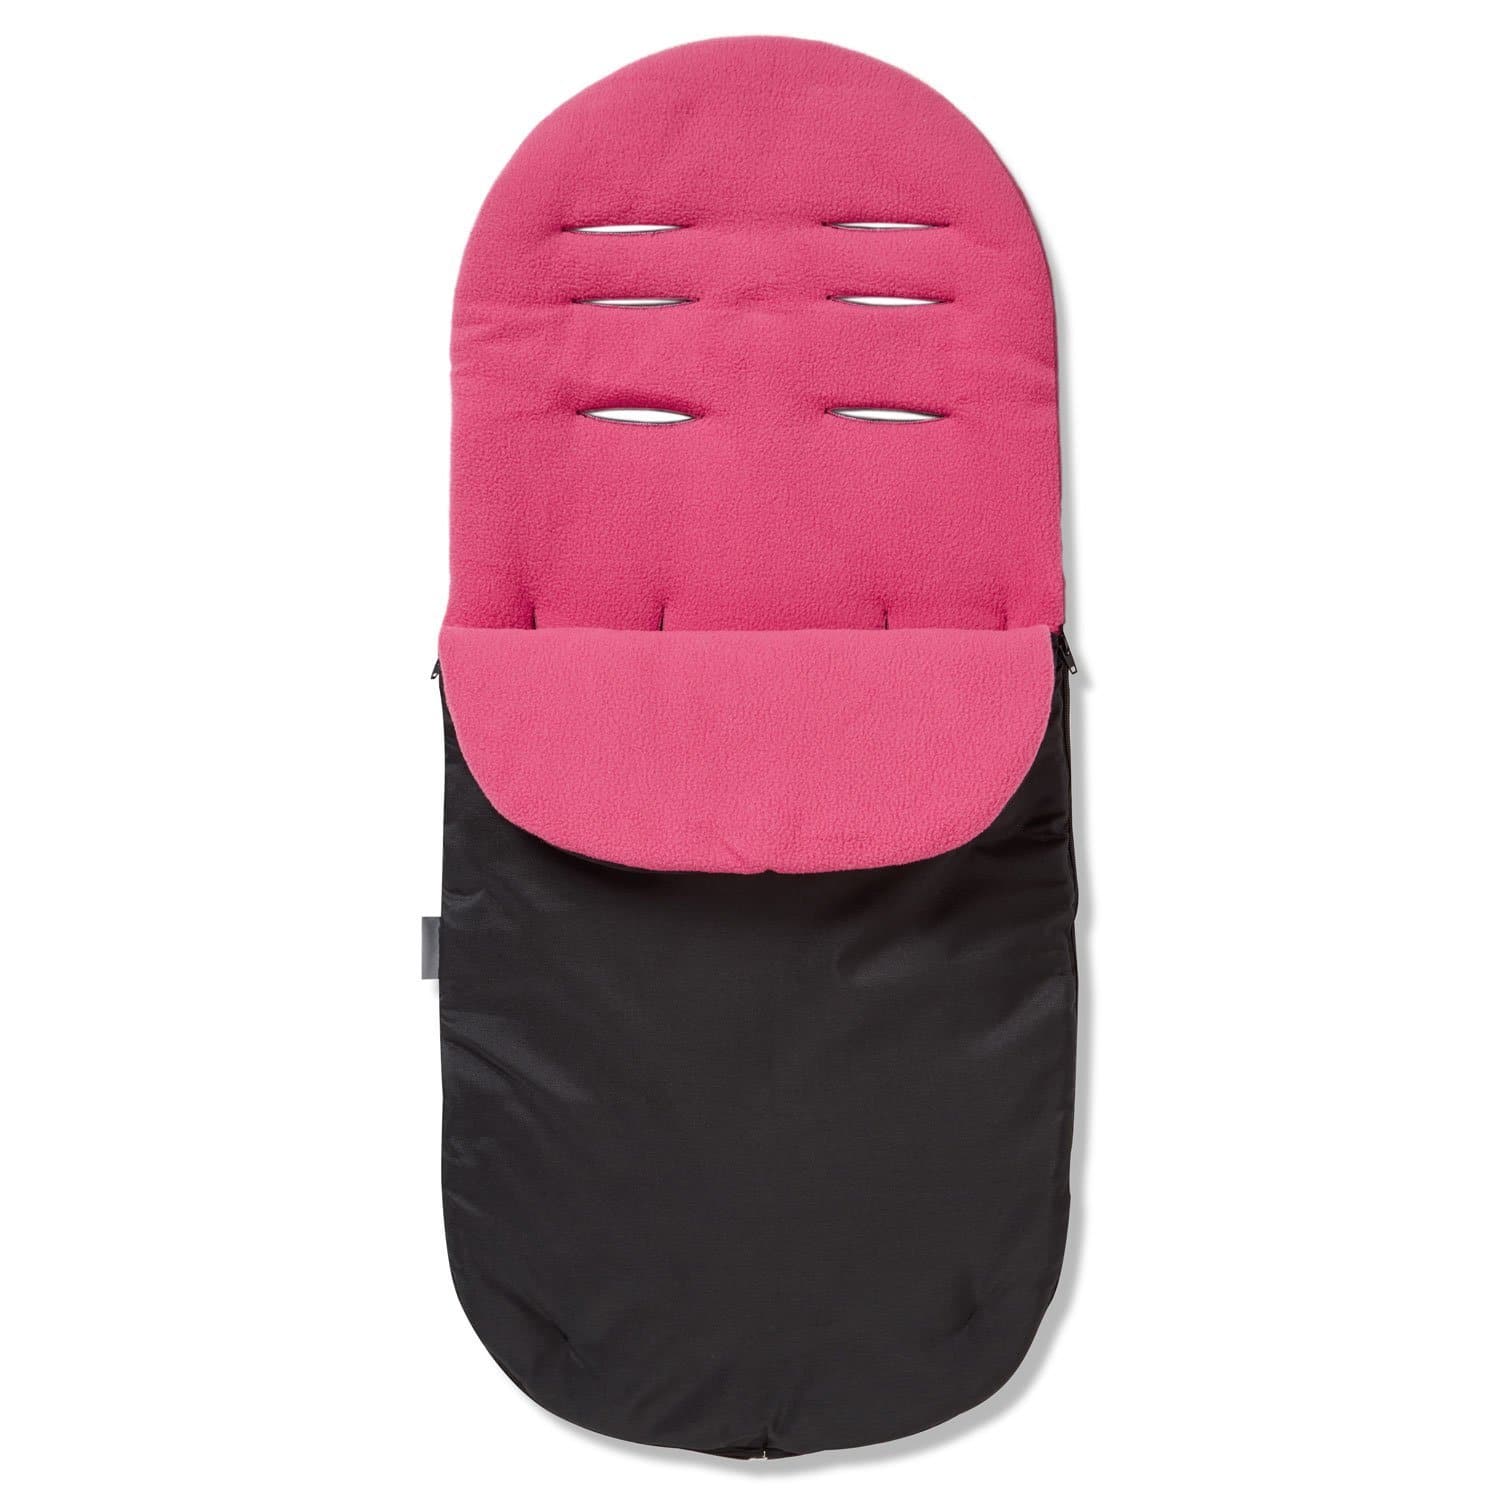 Footmuff / Cosy Toes Compatible with Kiddicouture - Dark Pink / Fits All Models | For Your Little One